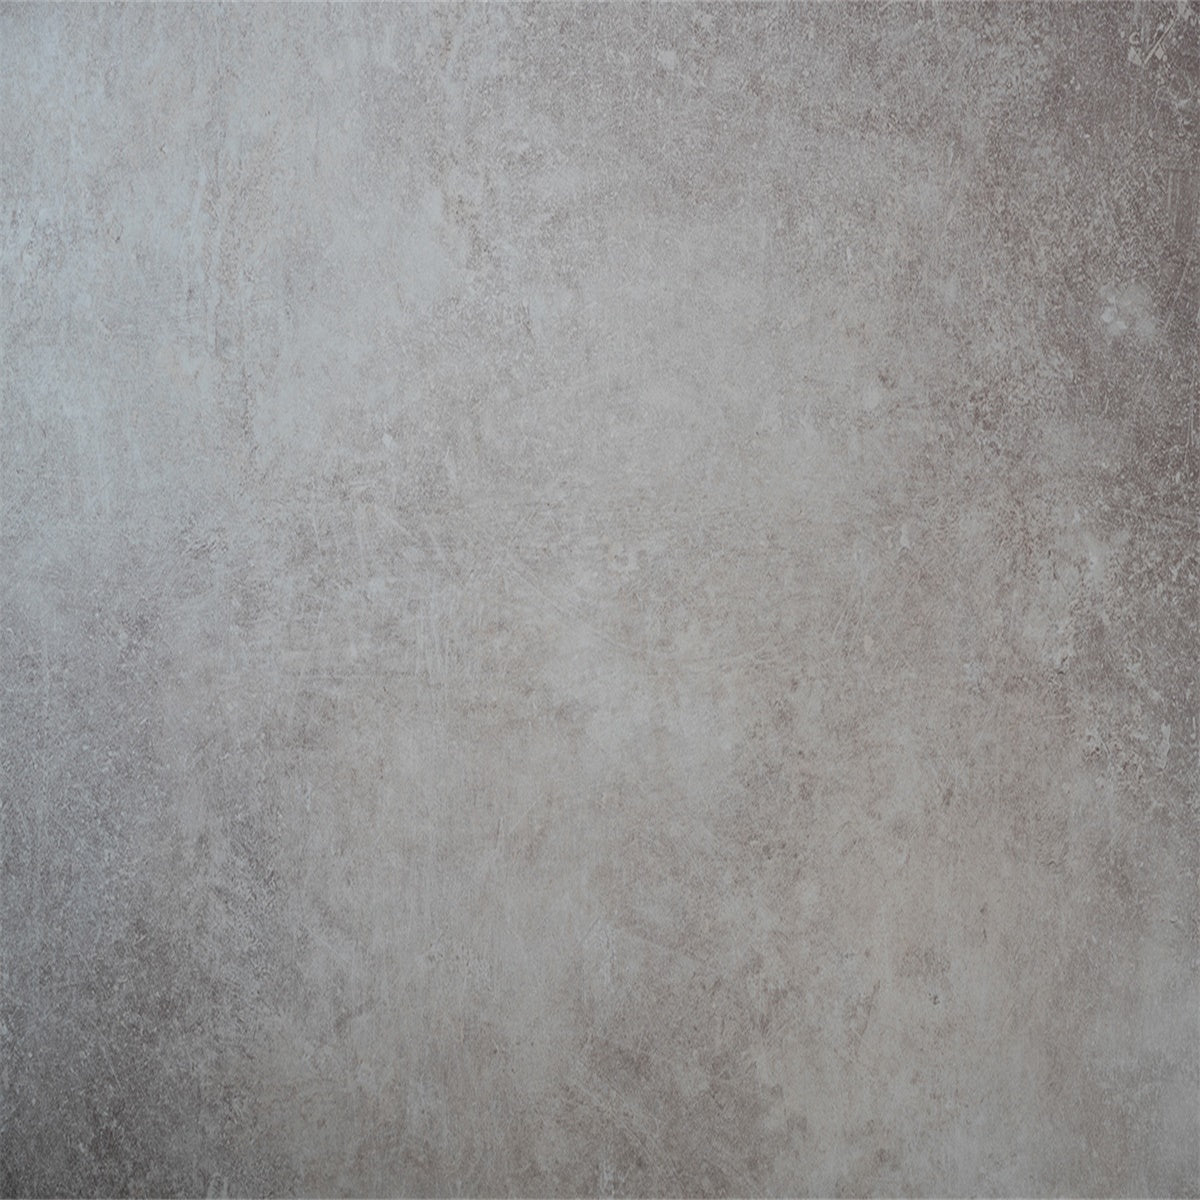 Abstract Gray Wall Photography Backdrops for Picture